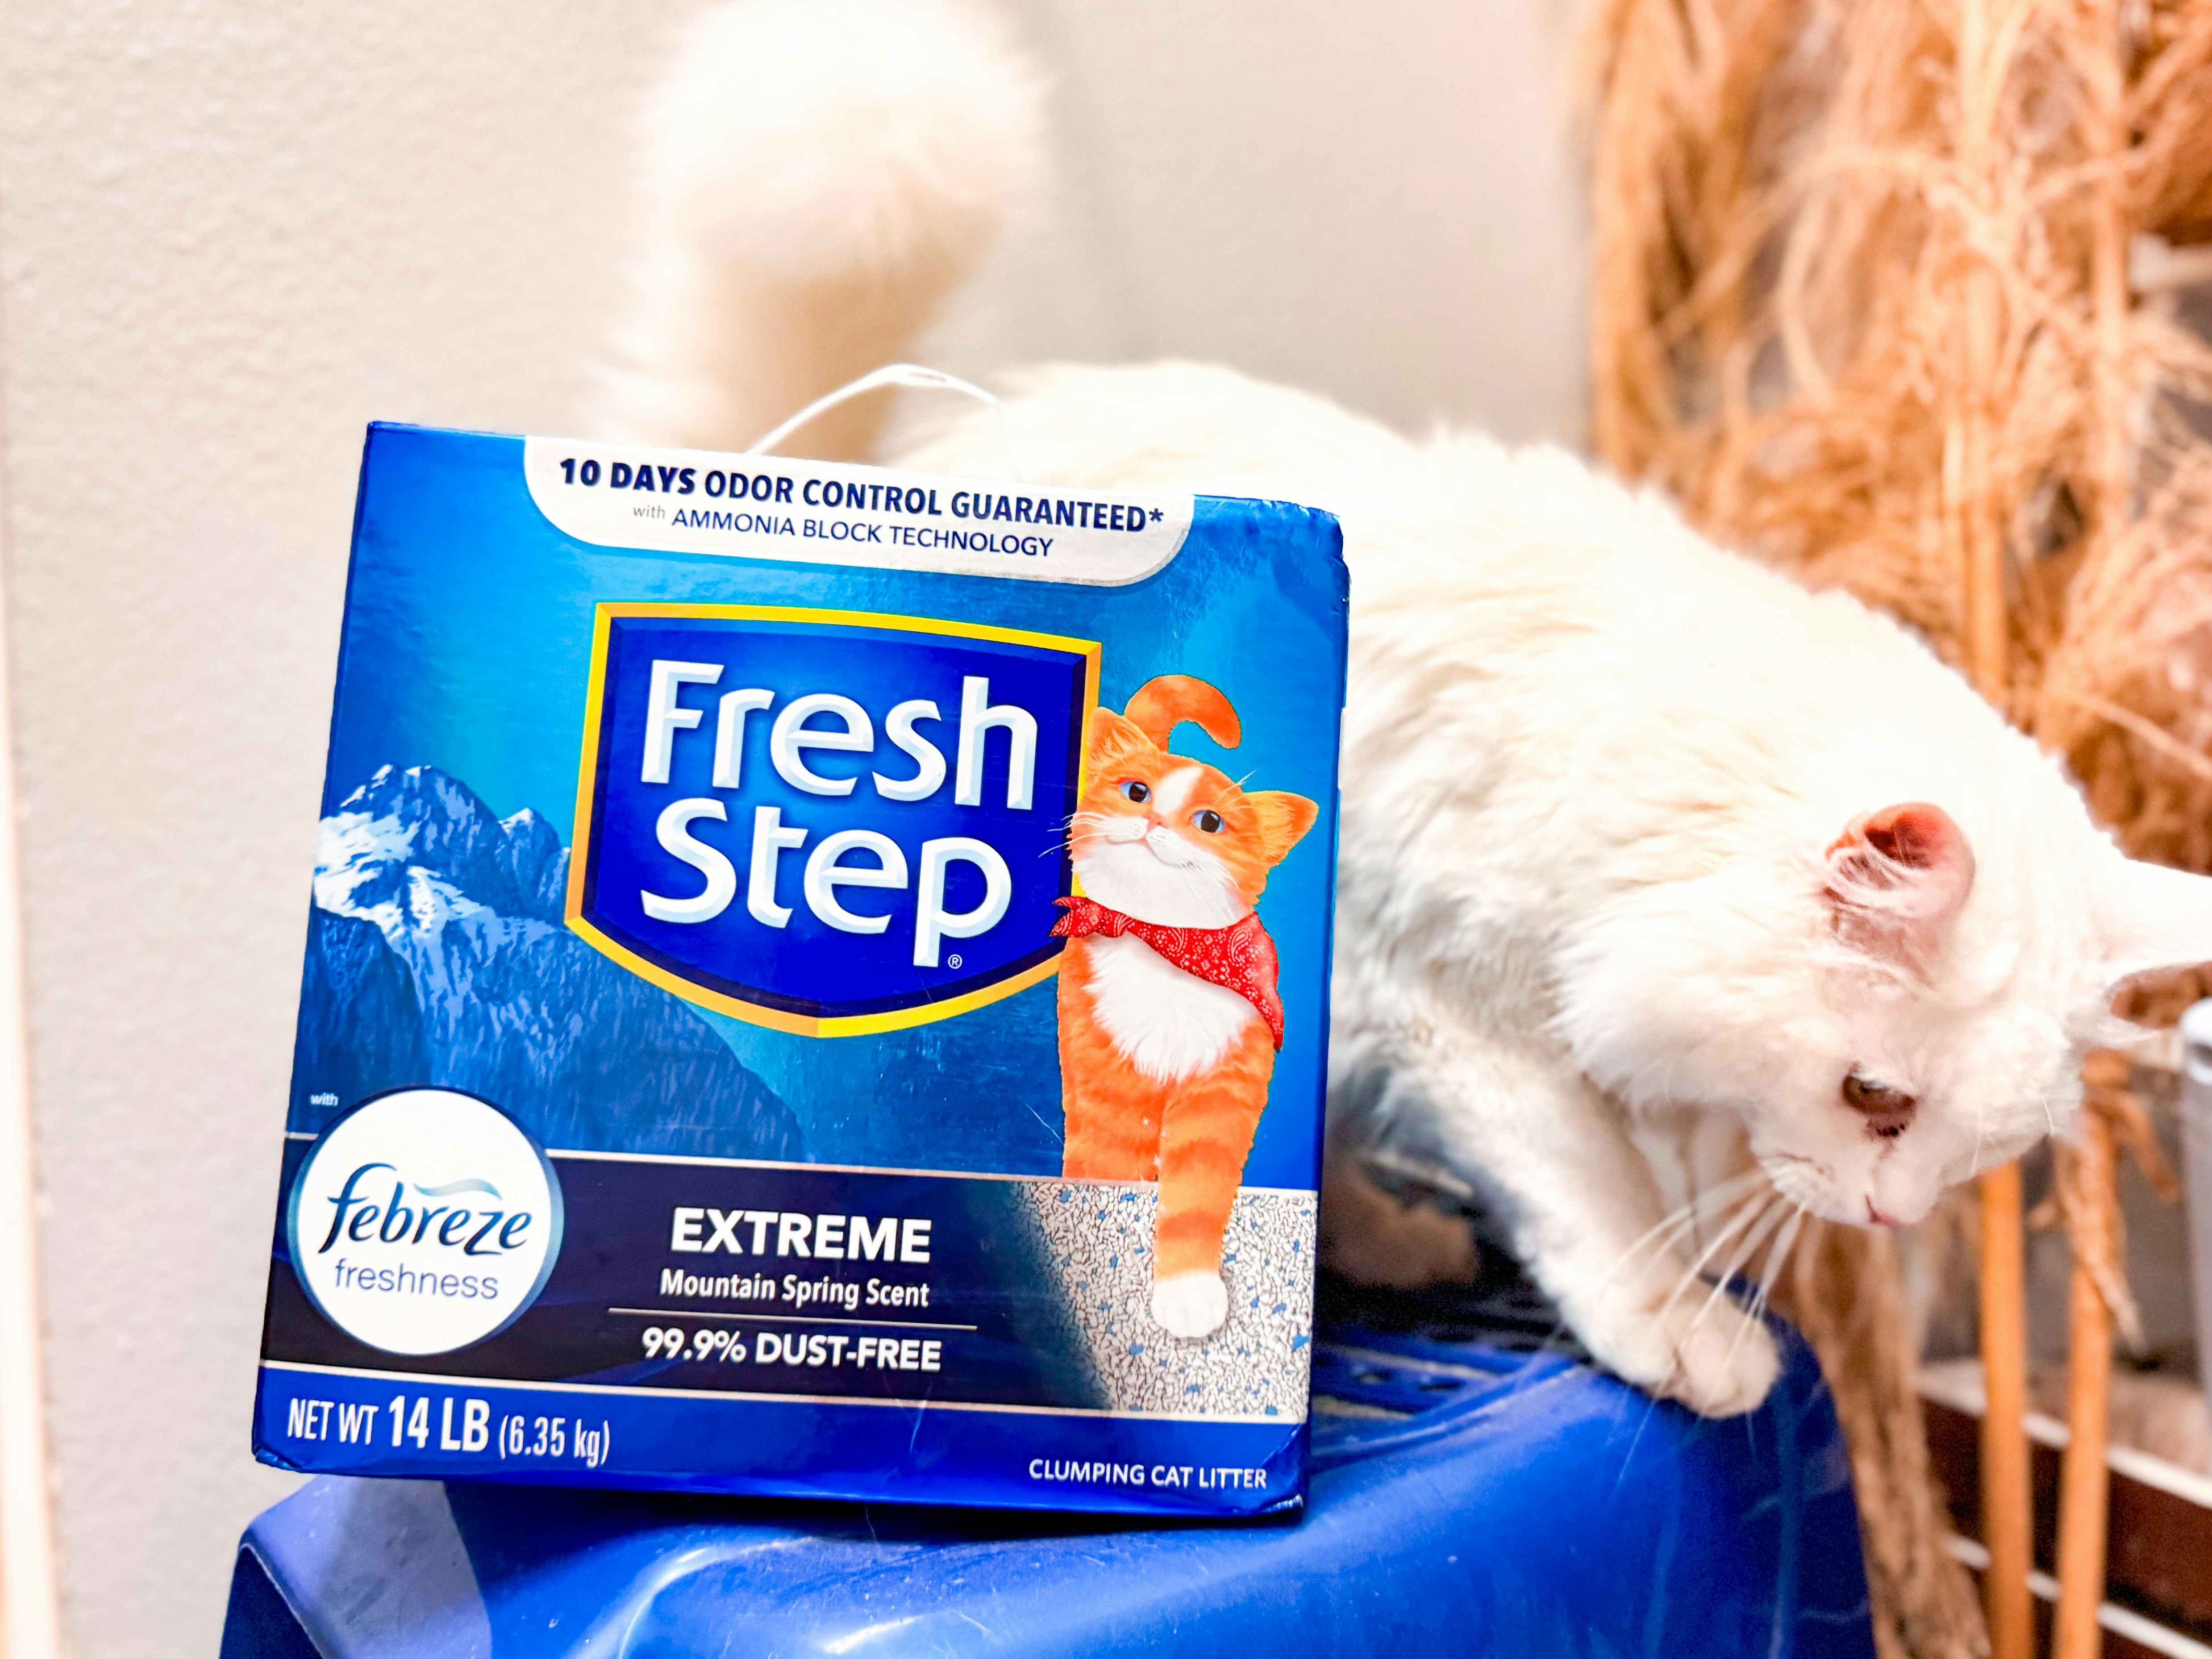 Get a Box of Fresh Step Cat Litter for $5 on Amazon, Plus More Deals